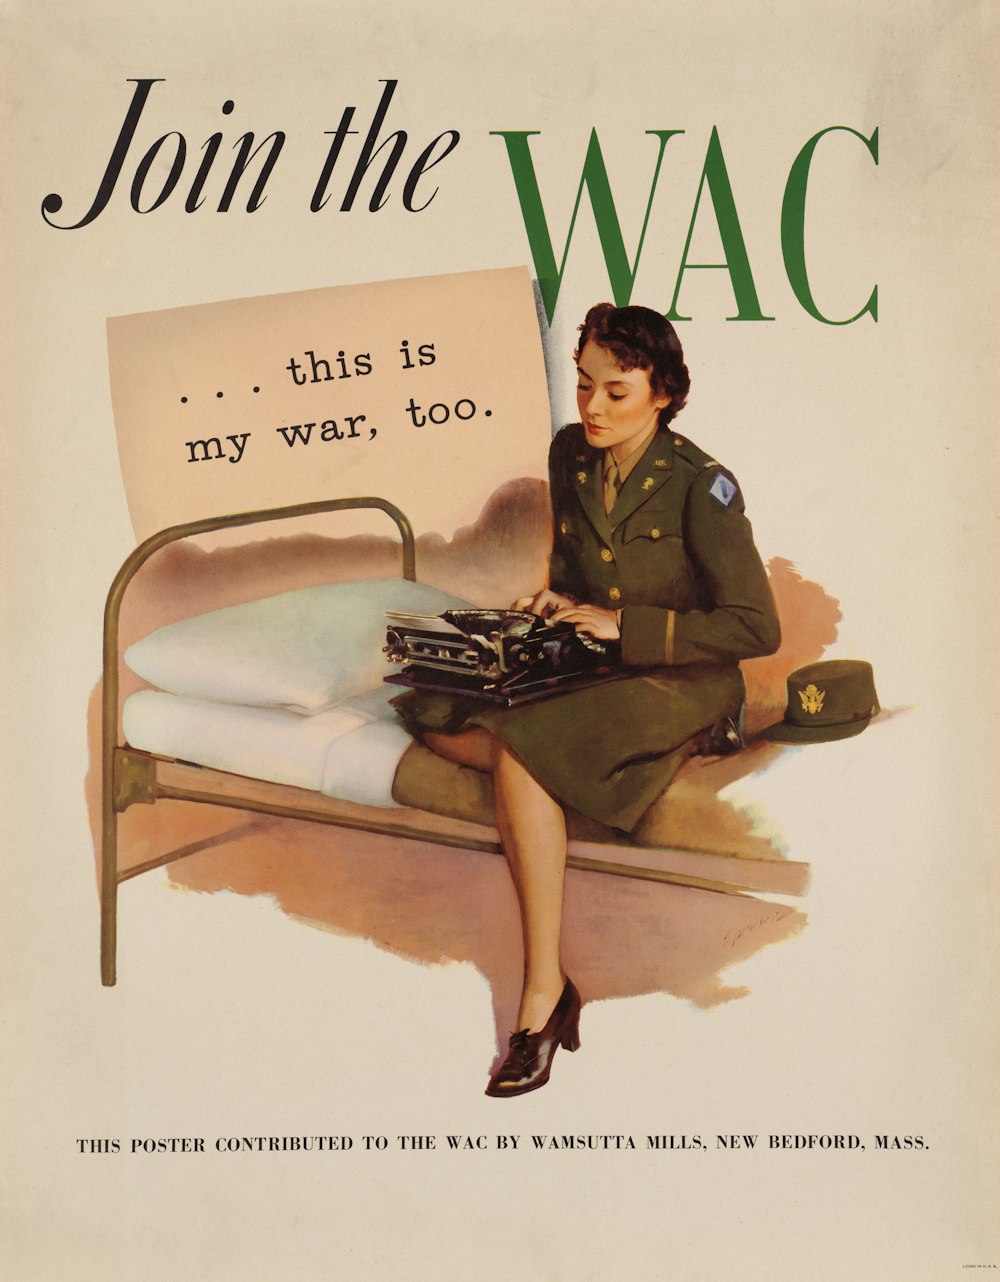 a woman in uniform sitting on a bed